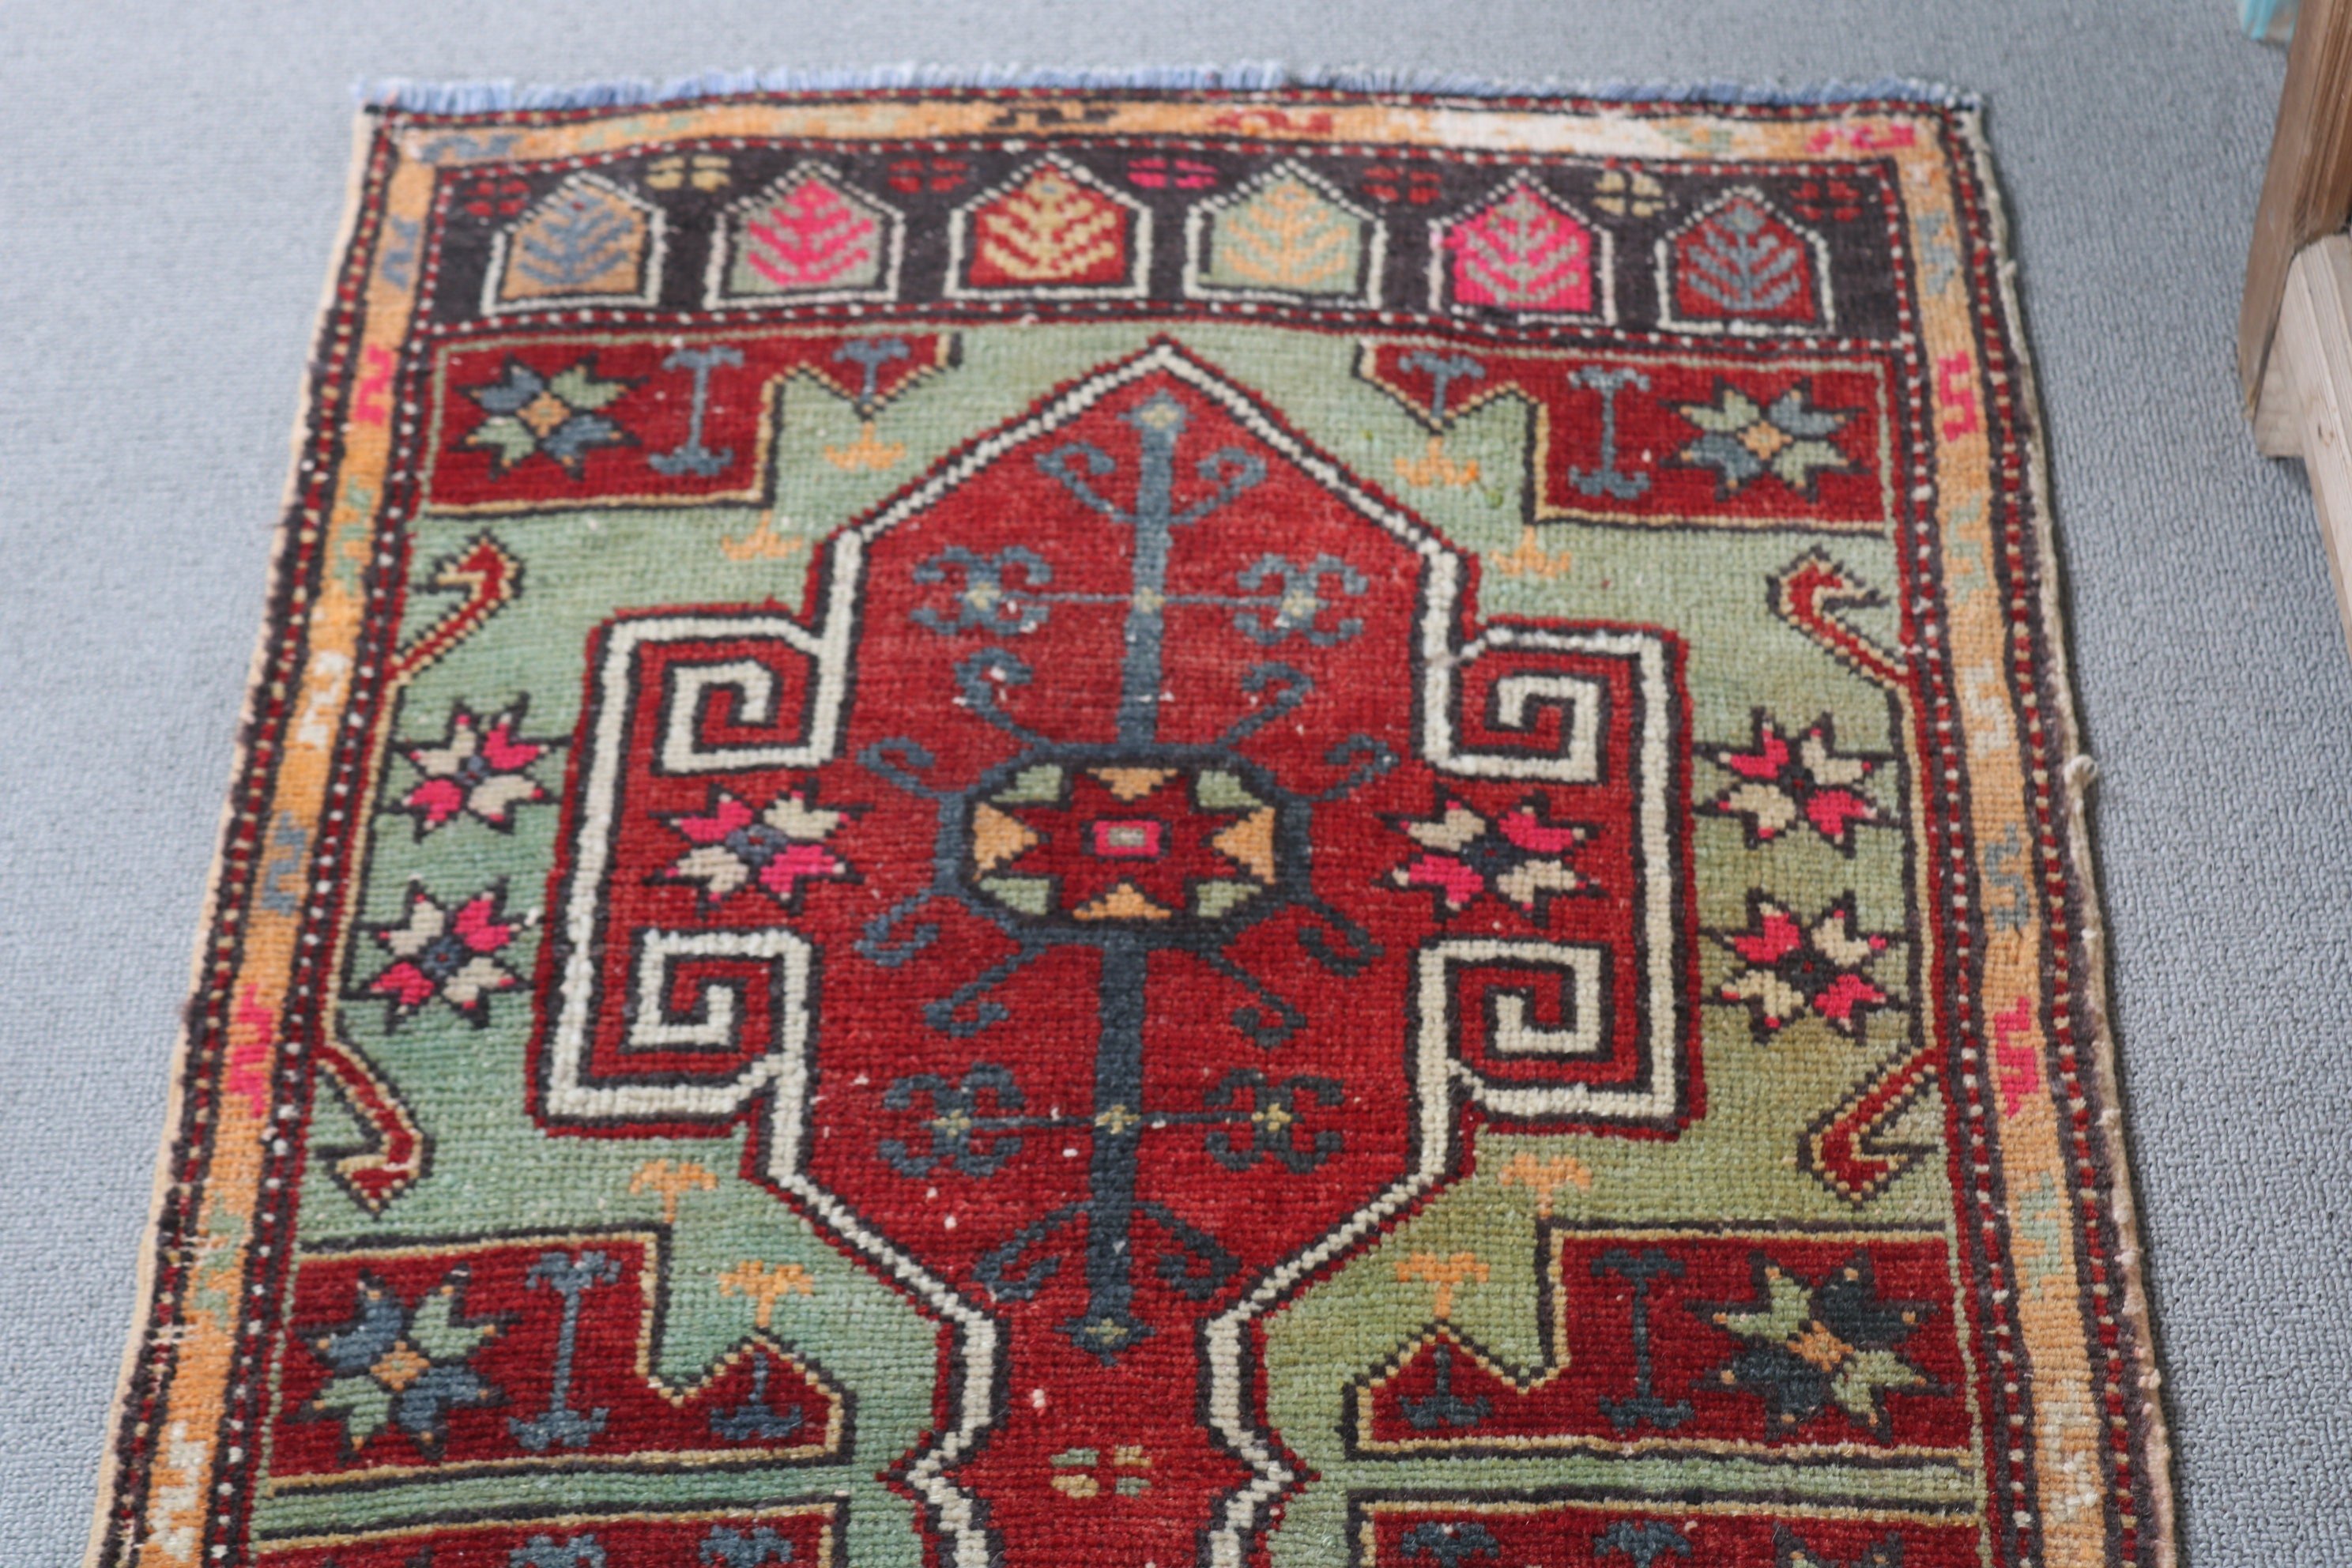 Red Floor Rug, Kitchen Rugs, Rugs for Car Mat, Vintage Rug, 1.7x3.5 ft Small Rug, Pastel Rug, Turkish Rugs, Oushak Rug, Wall Hanging Rugs